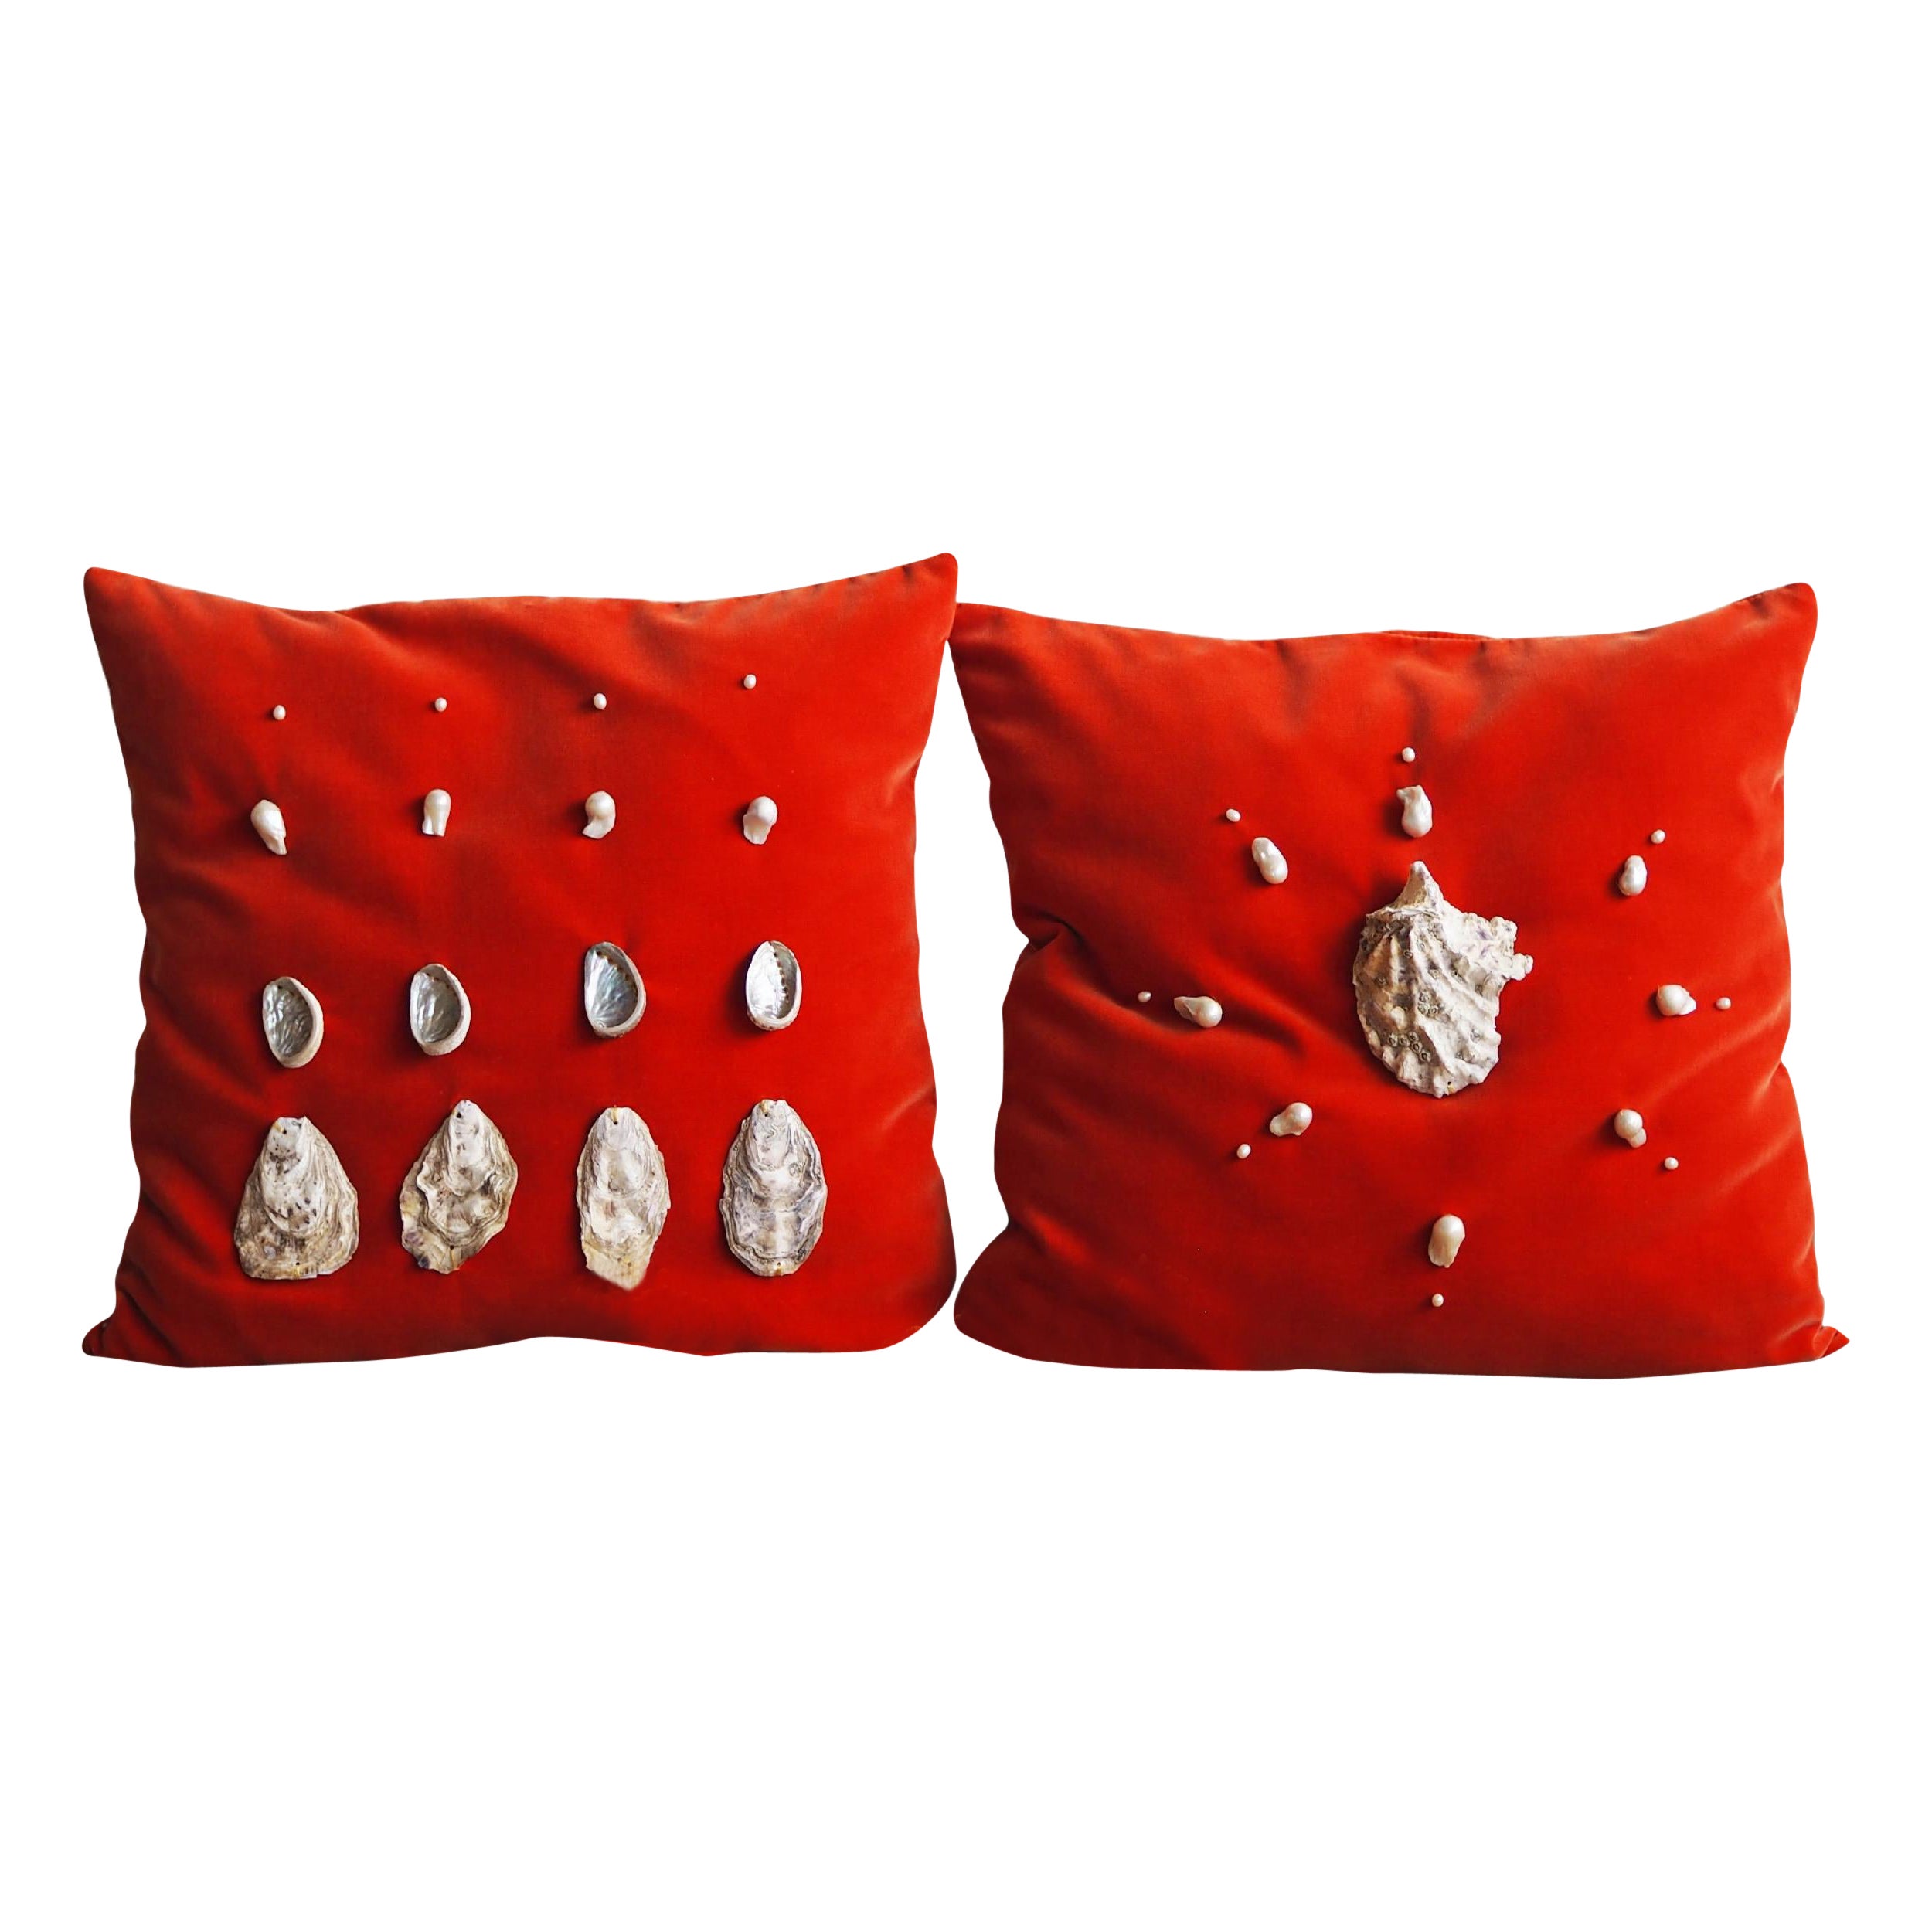 Set of 2 Bon Appetit Cushions by Culto Ponsoda For Sale